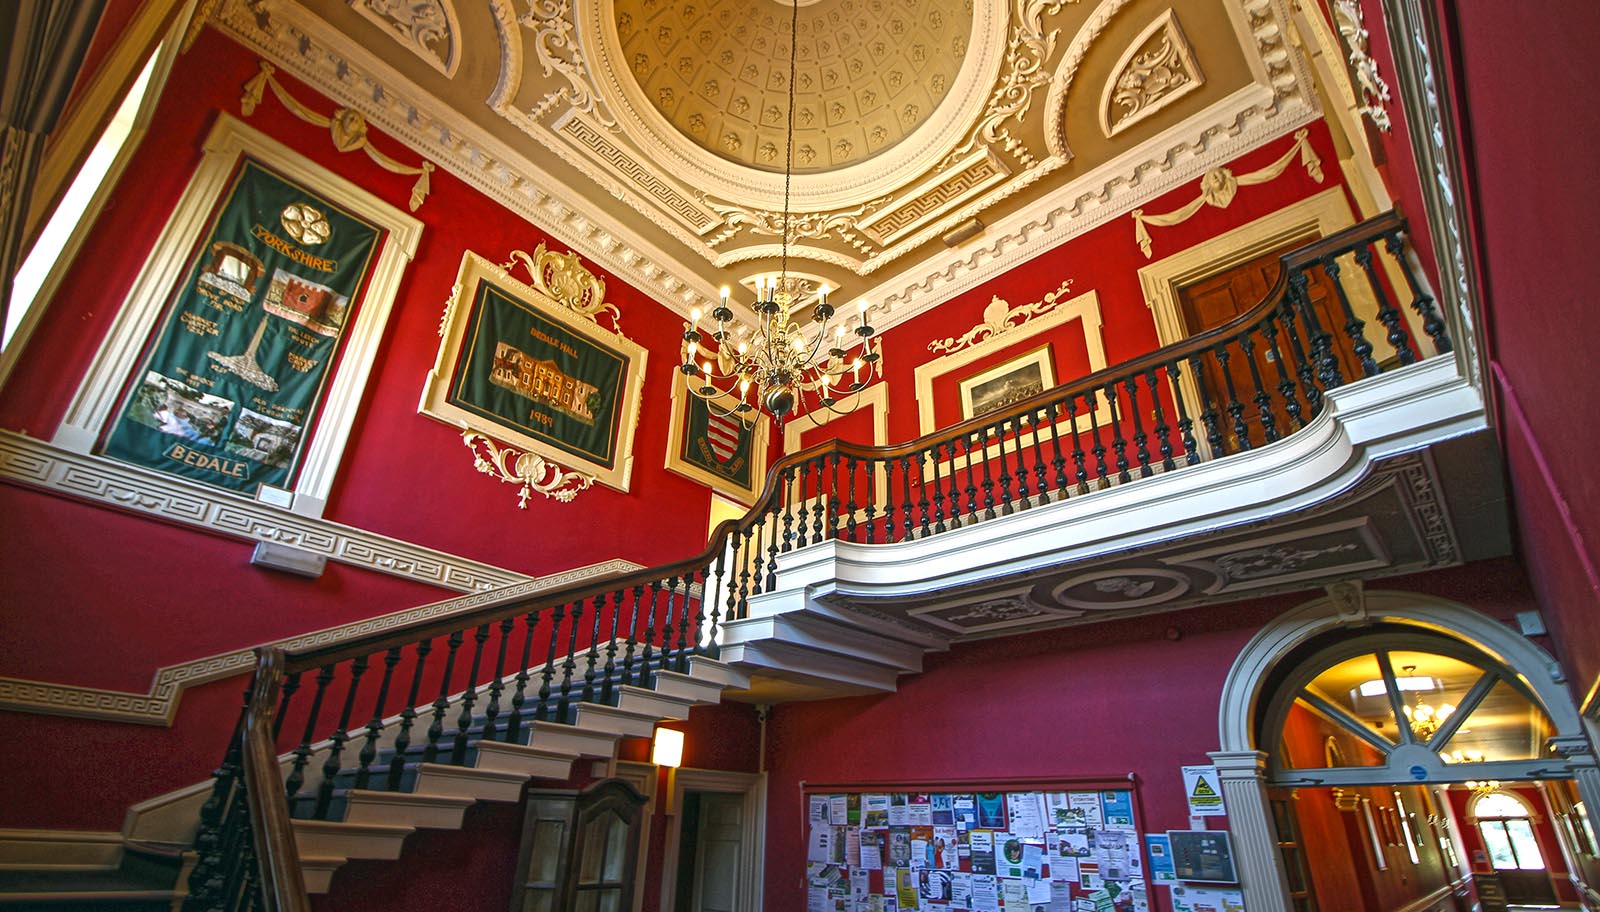 The Foyer at Bedale Hall during regular hours.